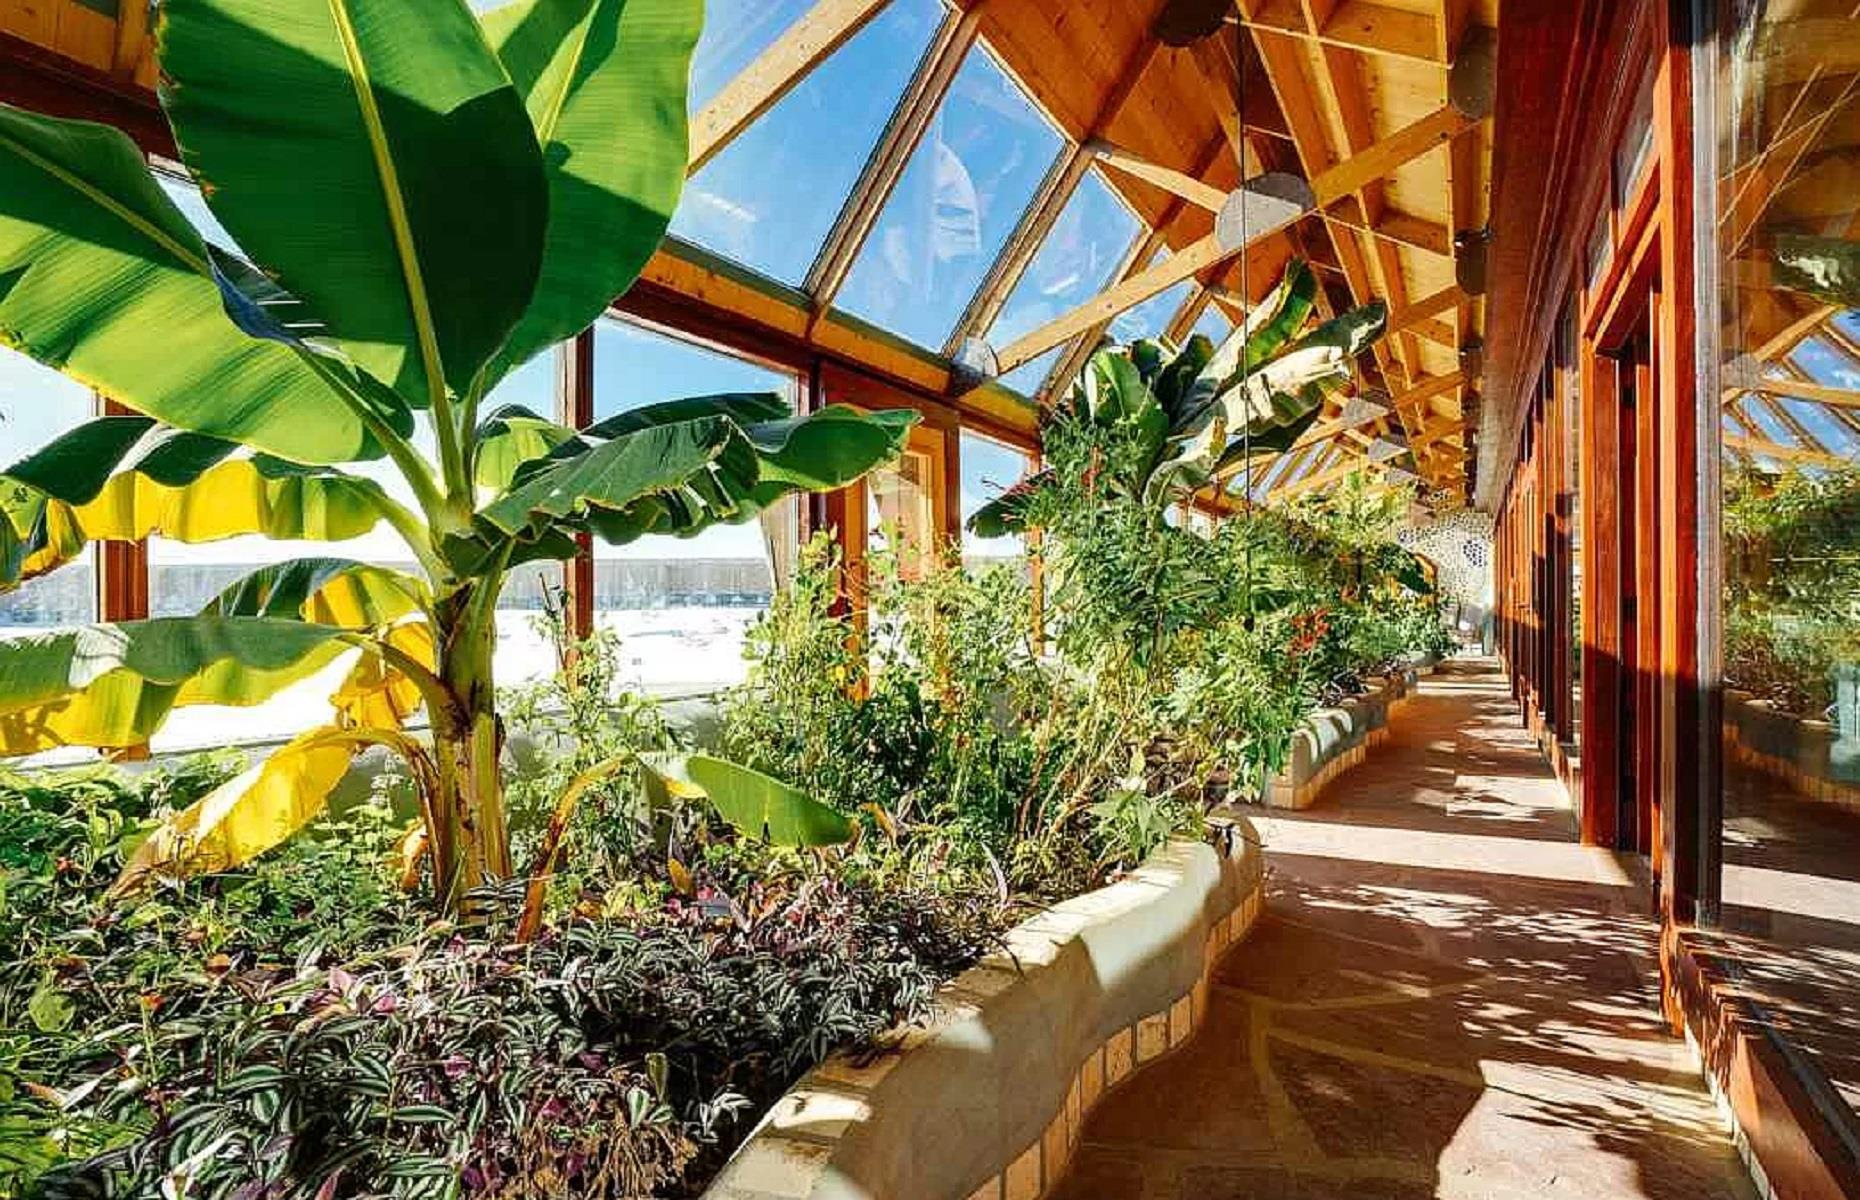 <p>Earthships showcase the beauty of organic architecture and clever, eco-friendly design. These incredible residential structures not only look amazing but provide their owners with everything they need to live a comfortable, self-sufficient life with no utility bills. Let's explore the most amazing Earthships ffrom around the world...</p>